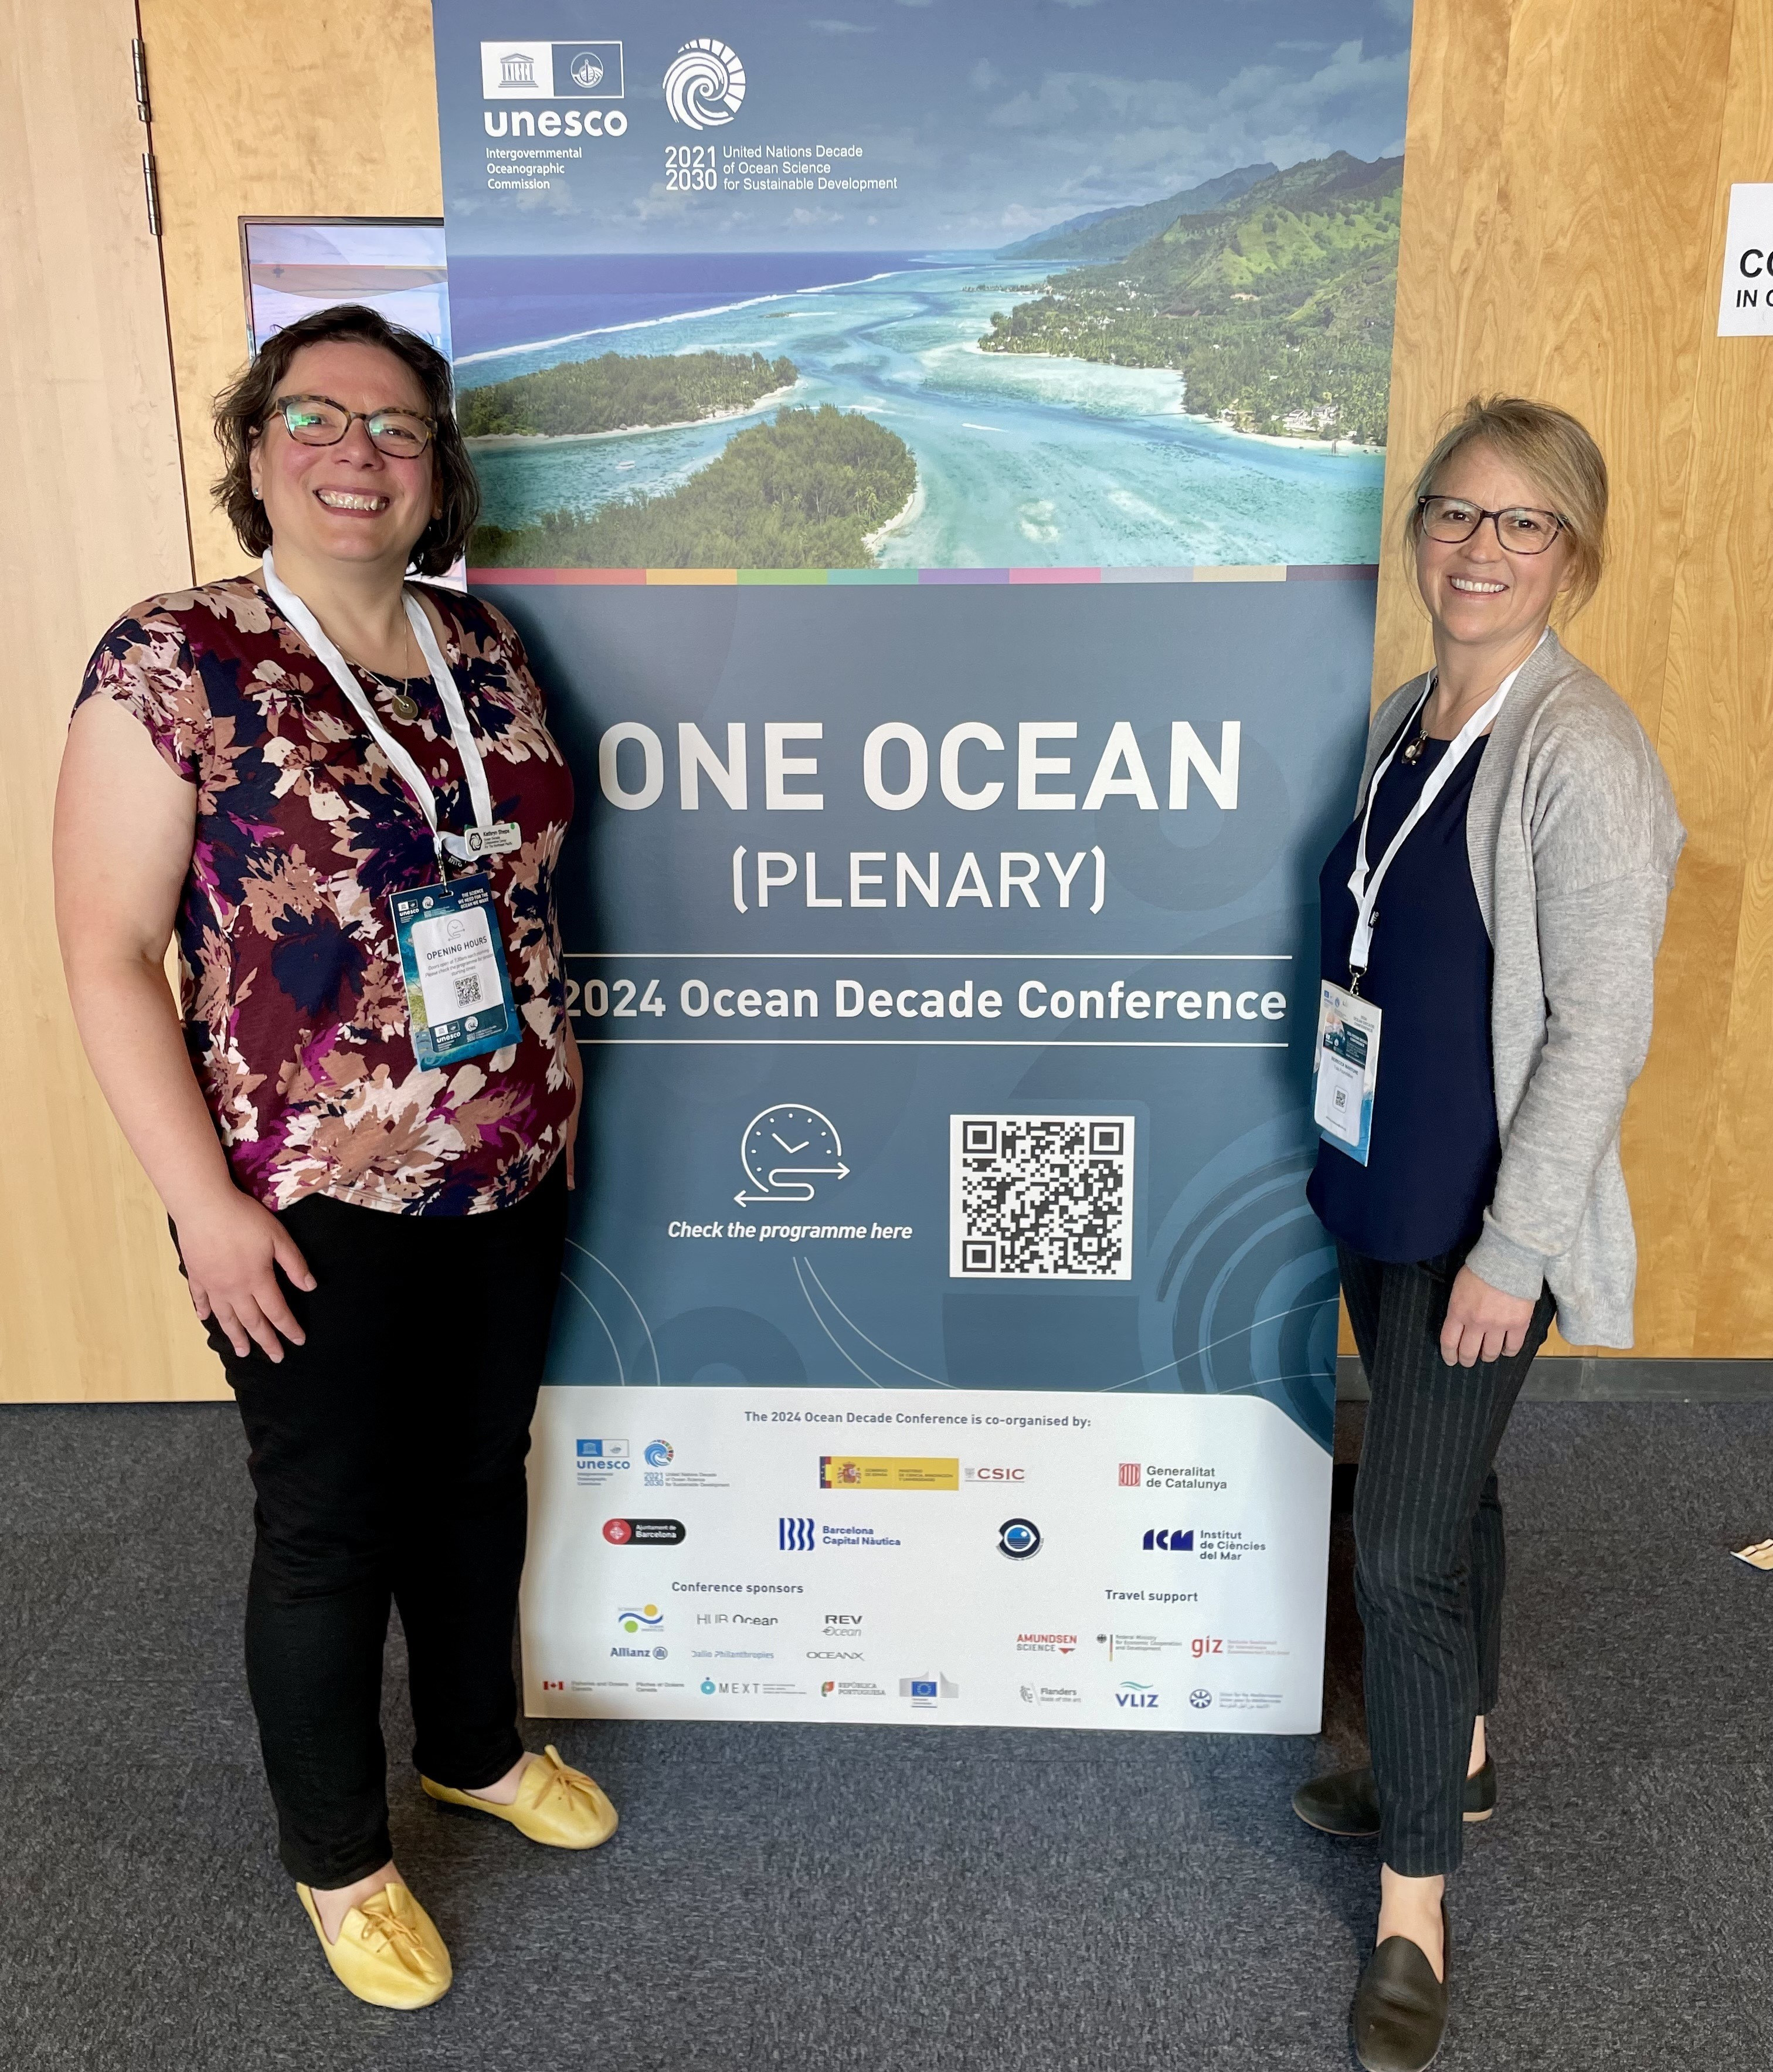 2024 Ocean Decade Conference: Reflections and Key Takeaways